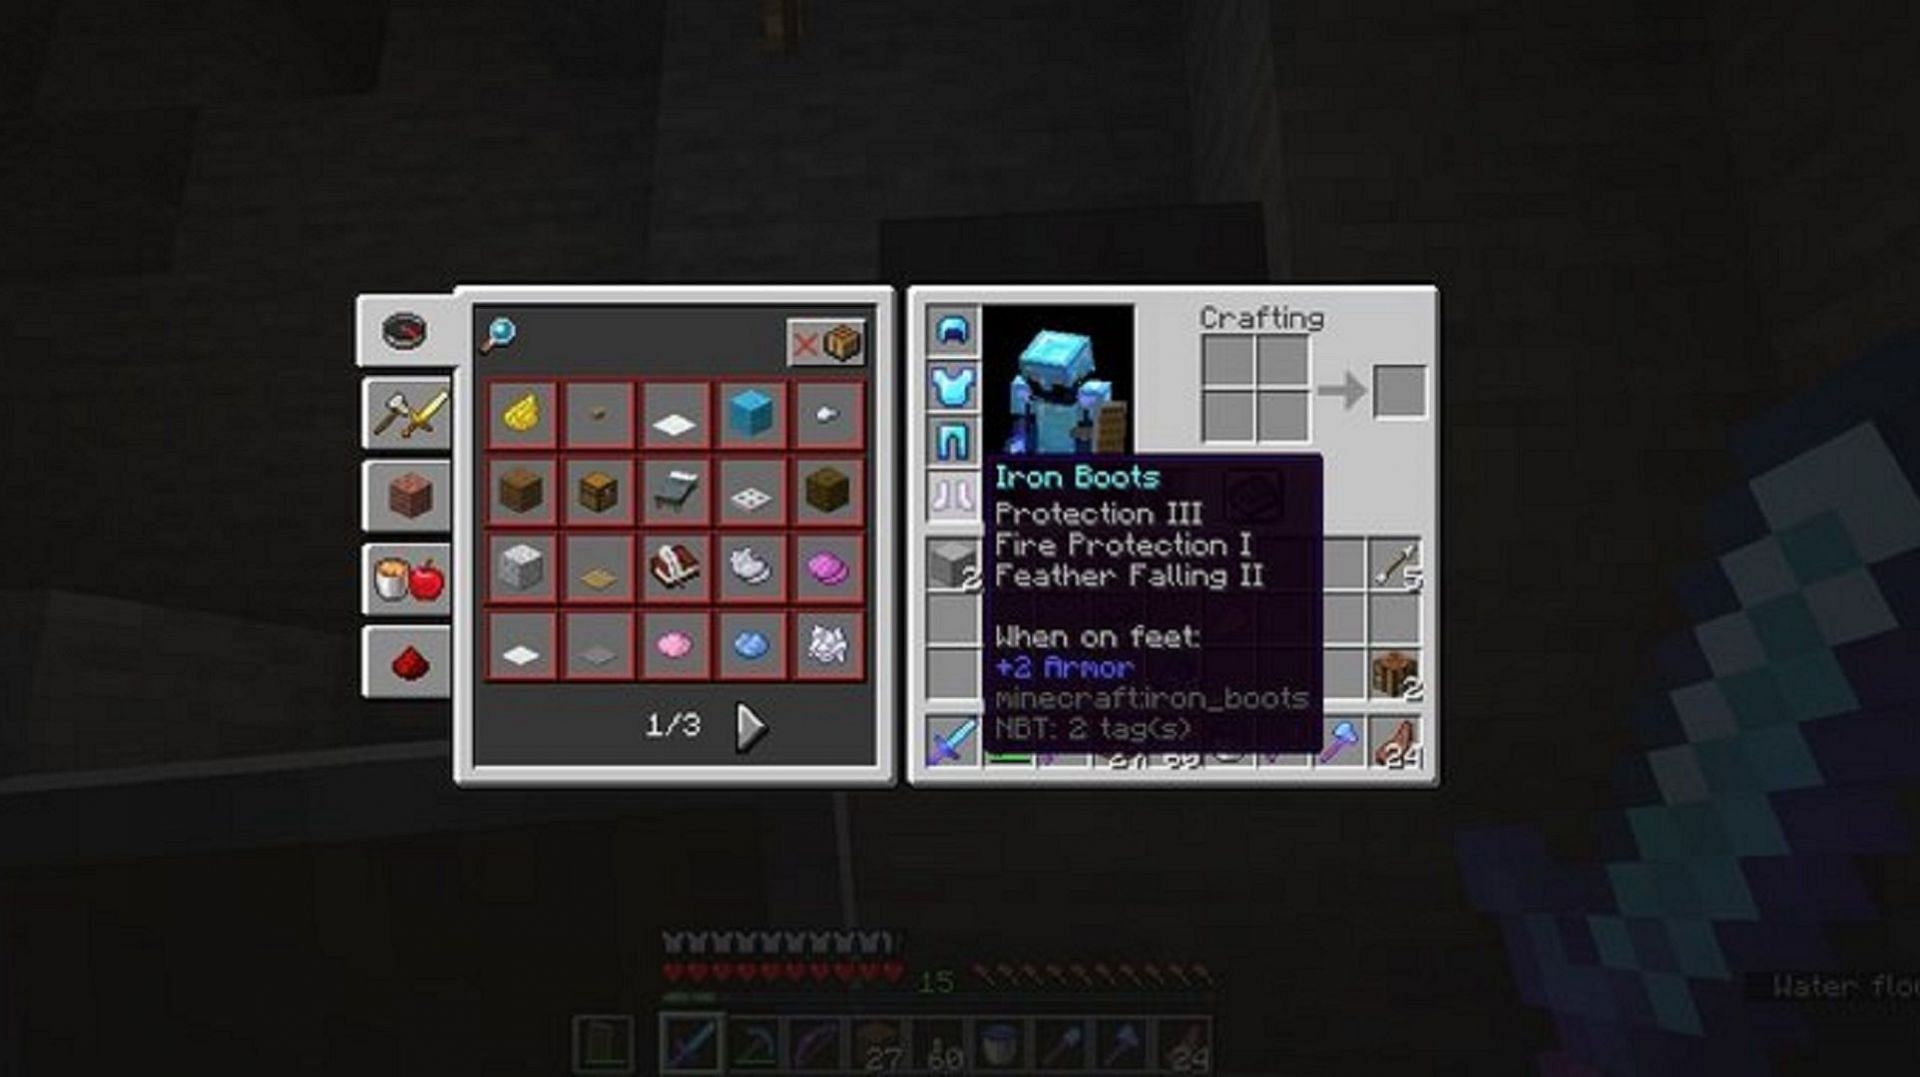 A player checks their boots which are enchanted with Protection III (Image via Mojang)